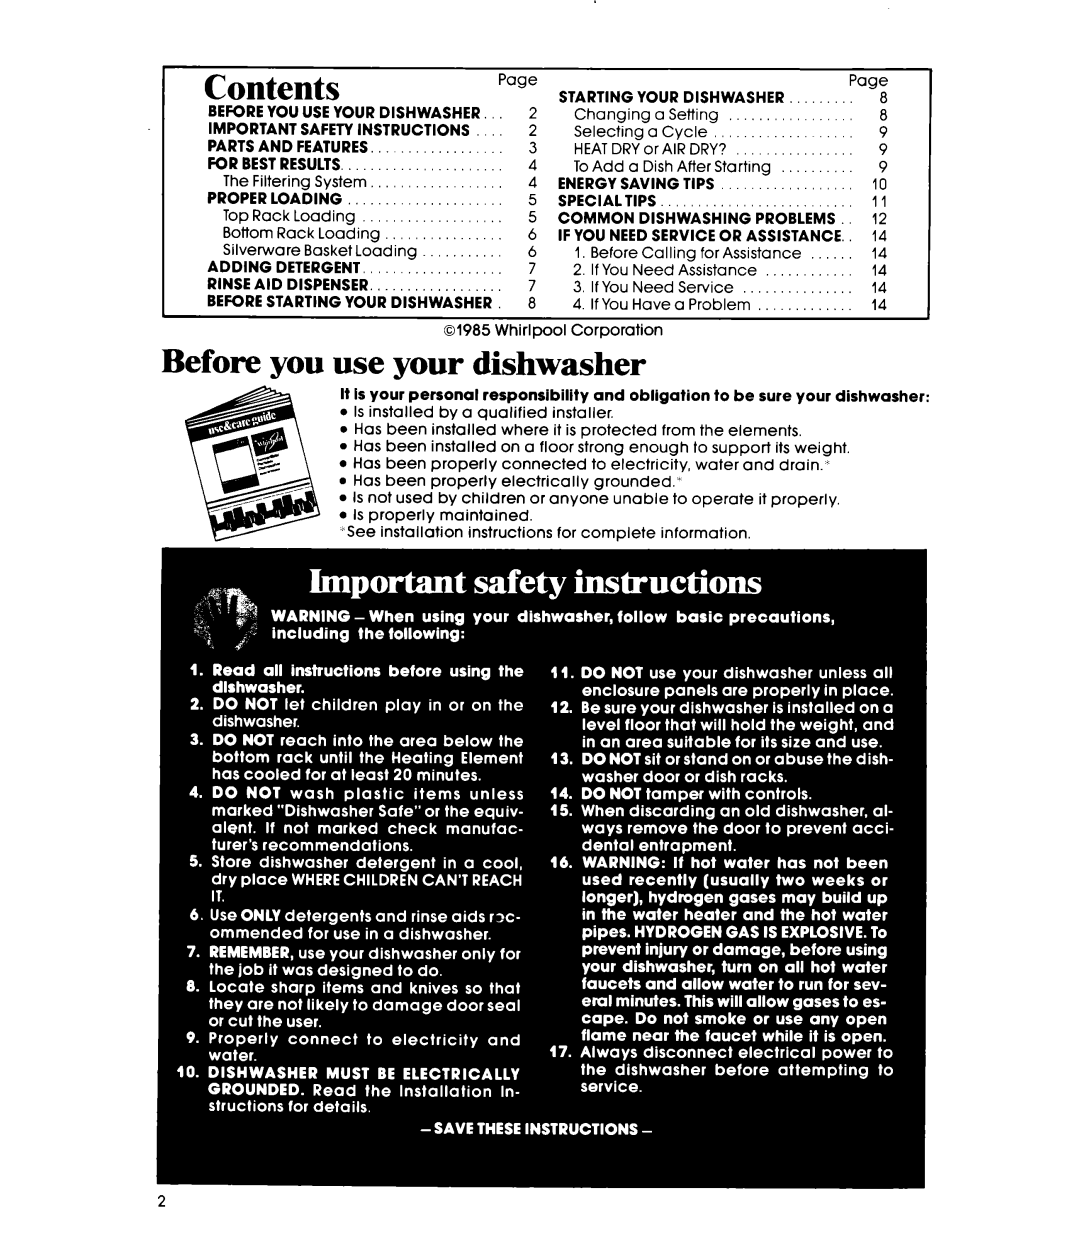 Whirlpool DU4500XM manual Contents, Before you use your dishwasher 